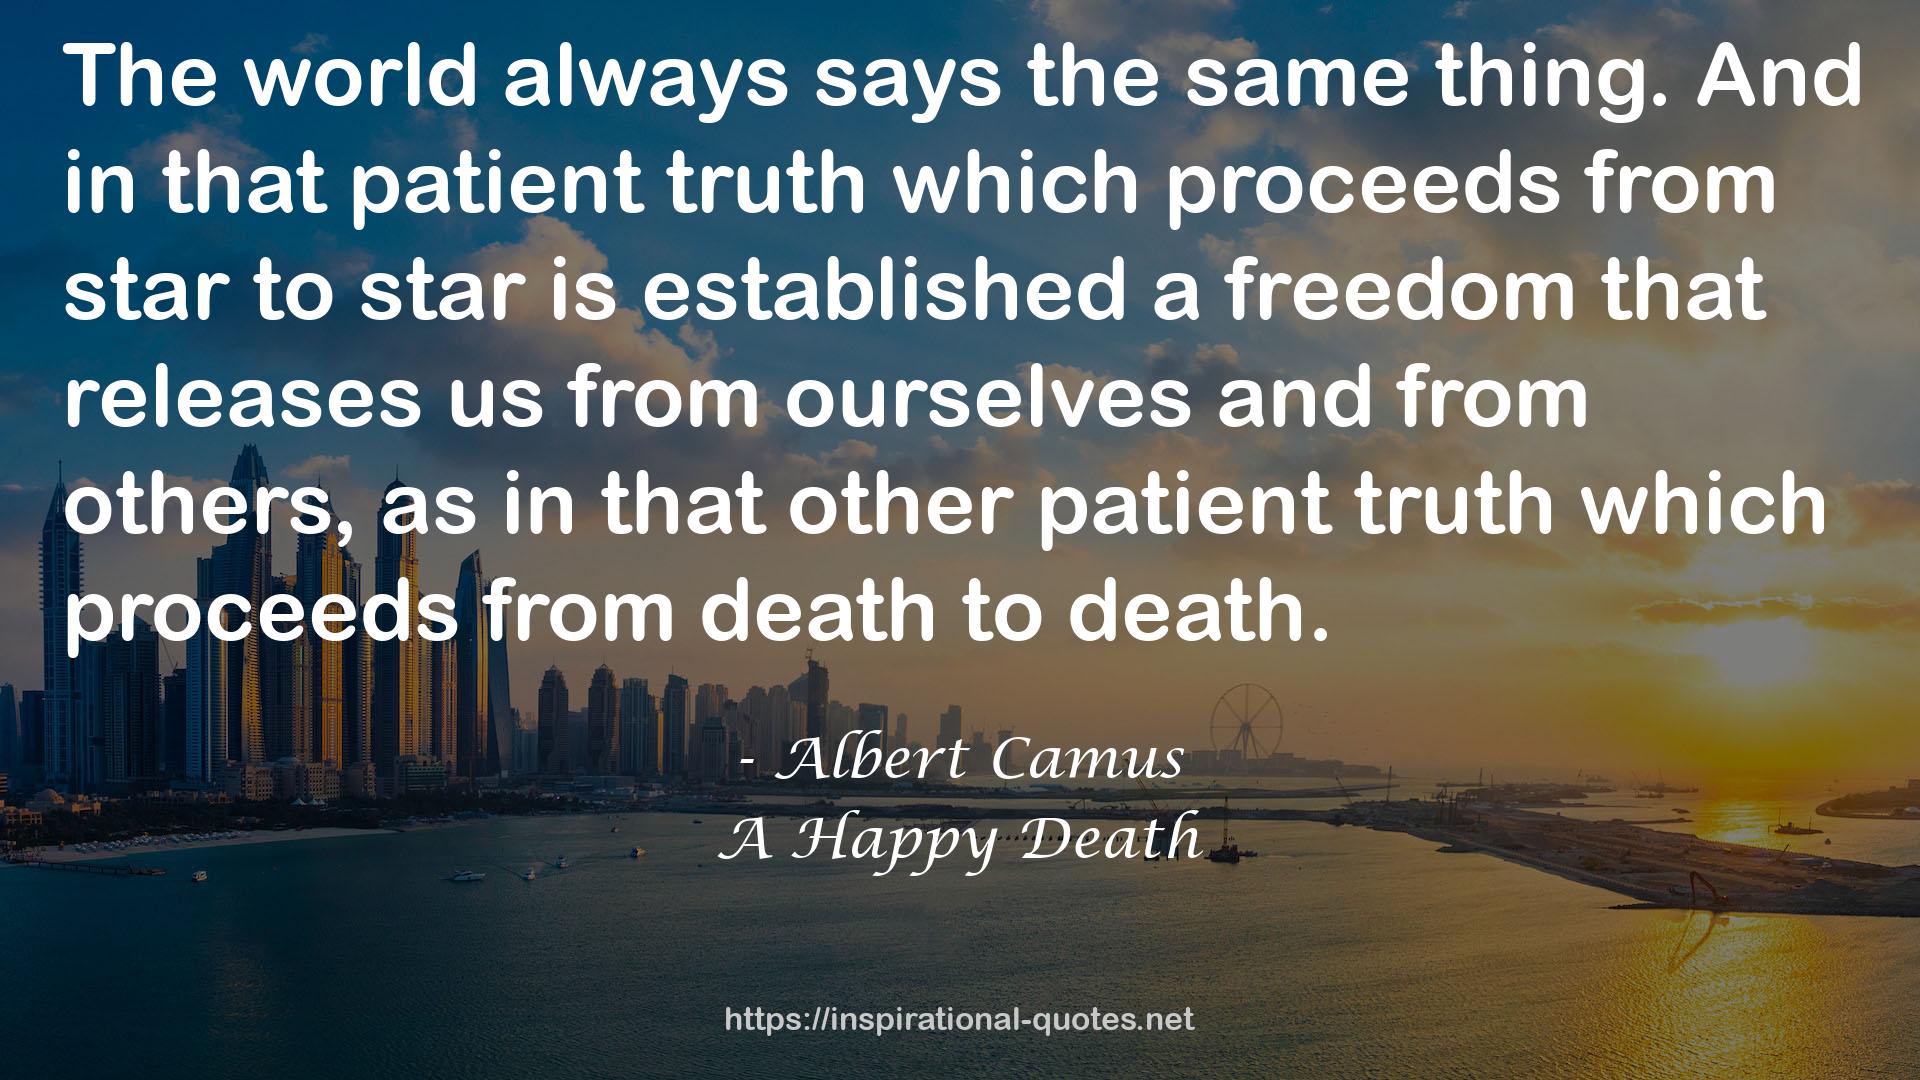 that other patient truth  QUOTES